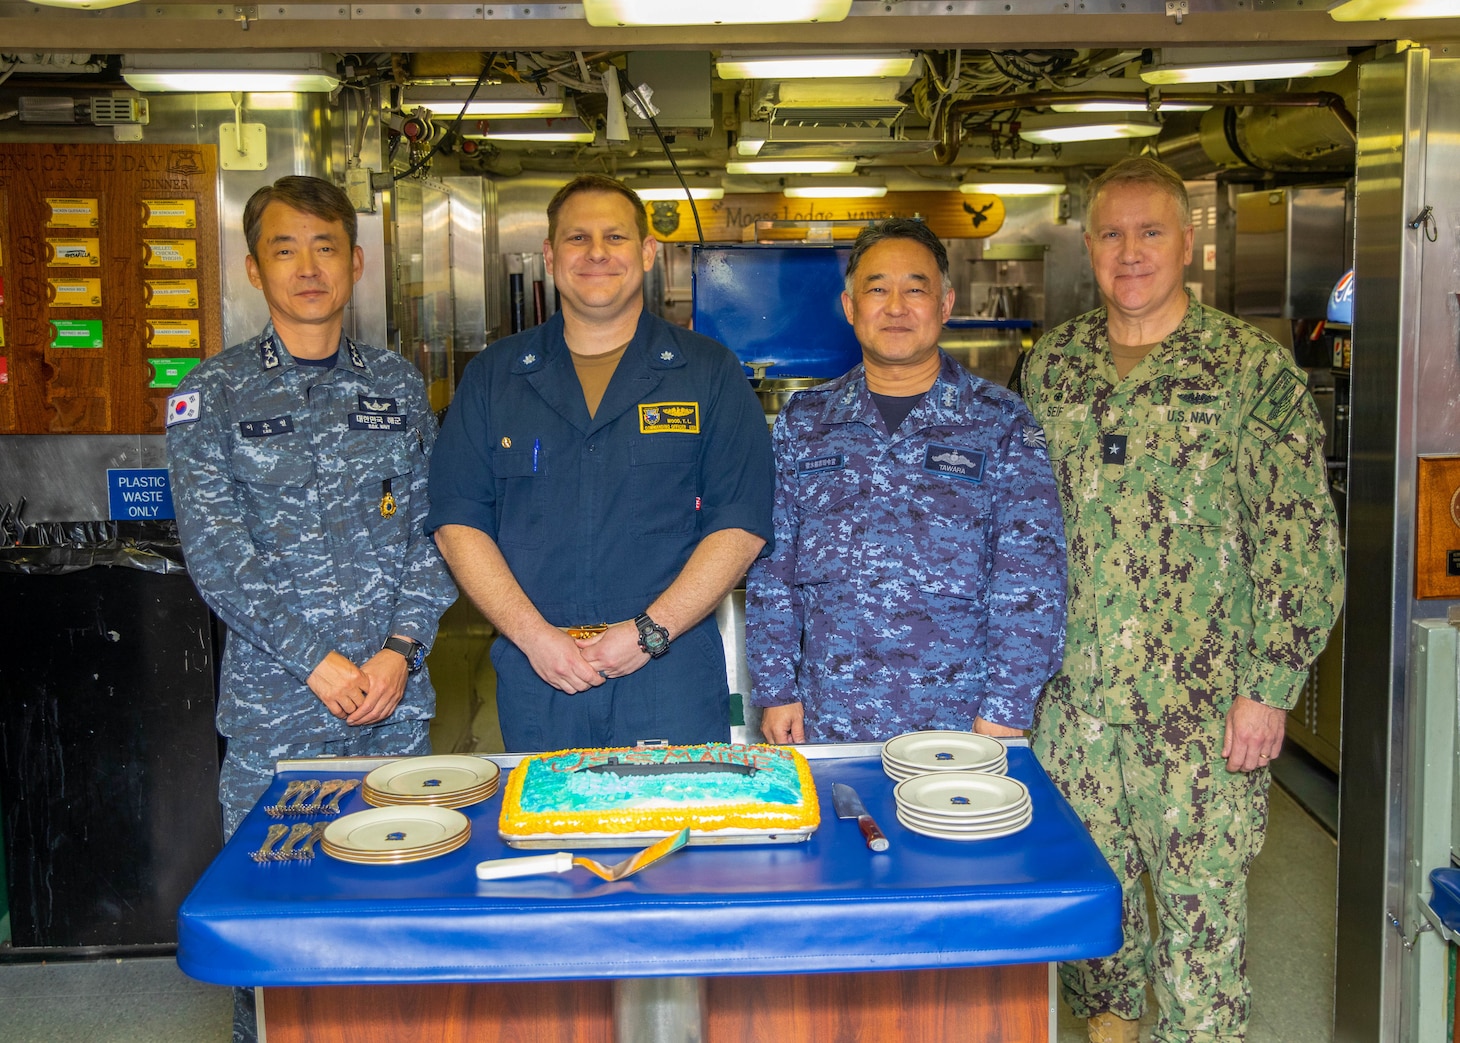 From left, Republic of Korea (ROK) Navy Rear Adm. Su Youl Lee, commander, ROK Navy Submarine Force; U.S. Navy Cmdr. Travis Wood, commanding officer of the Ohio-class ballistic-missile submarine USS Maine (SSBN 741) Gold crew; Japan Maritime Self-Defense Force (JMSDF) Vice Adm. Tateki Tawara, commander, Fleet Submarine Force;, and U.S. Navy Rear Adm. Rick Seif, commander, Submarine Group 7; pose for a photo during an underway embark aboard Maine, April 18.